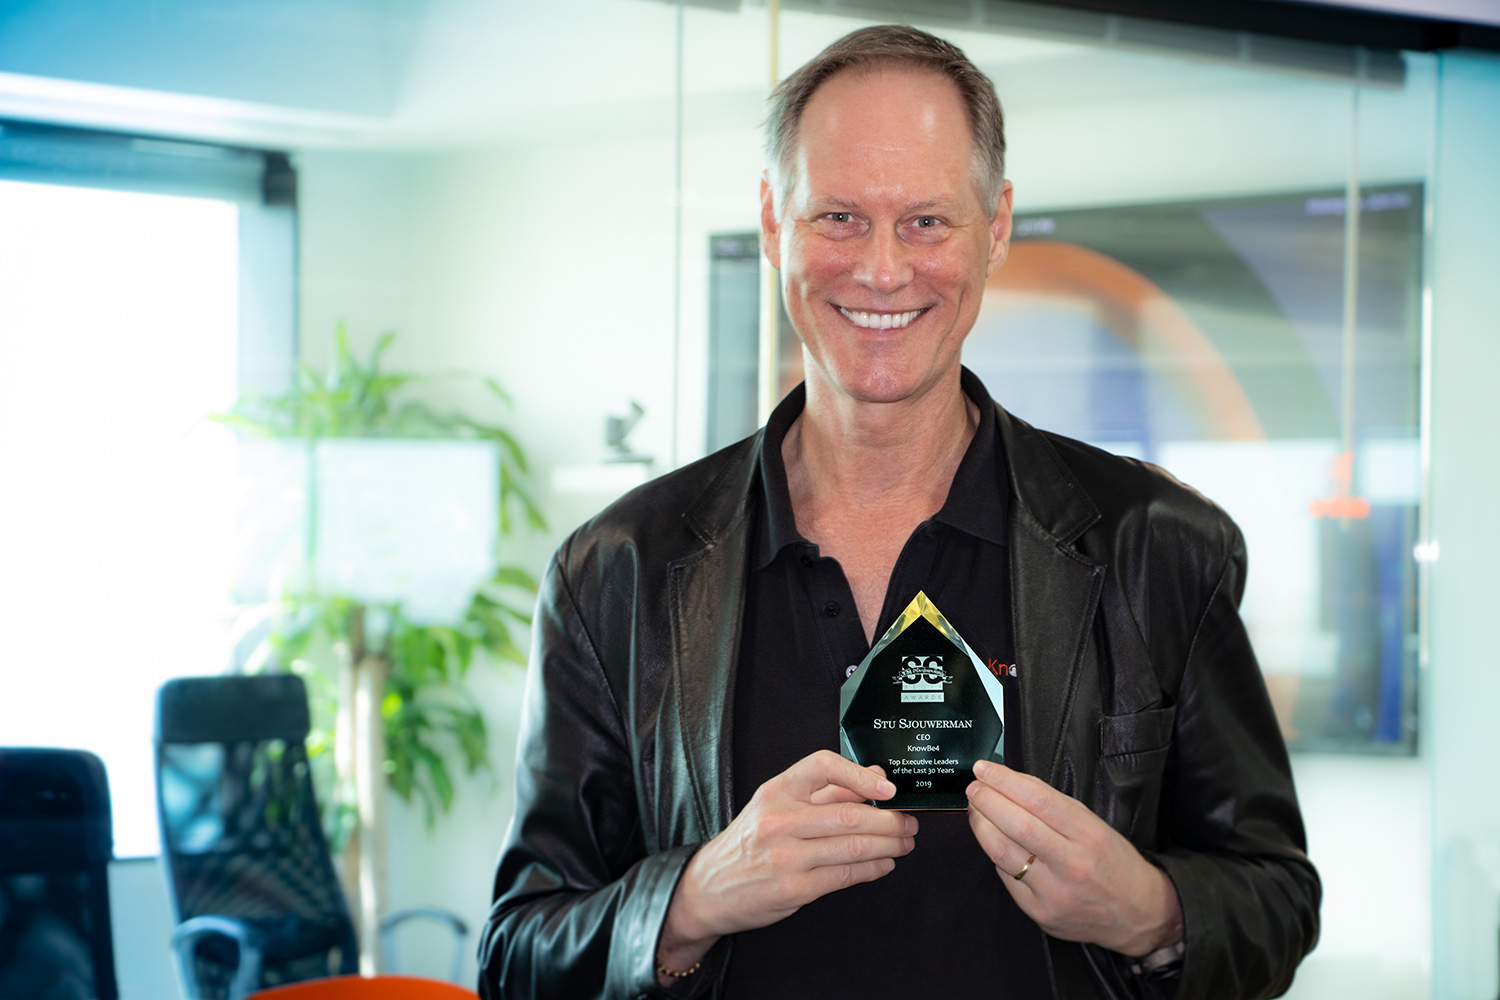 SC Awards 2019 Names KnowBe4 CEO Stu Sjouwerman a Top Executive Leader of the Last 30 Years